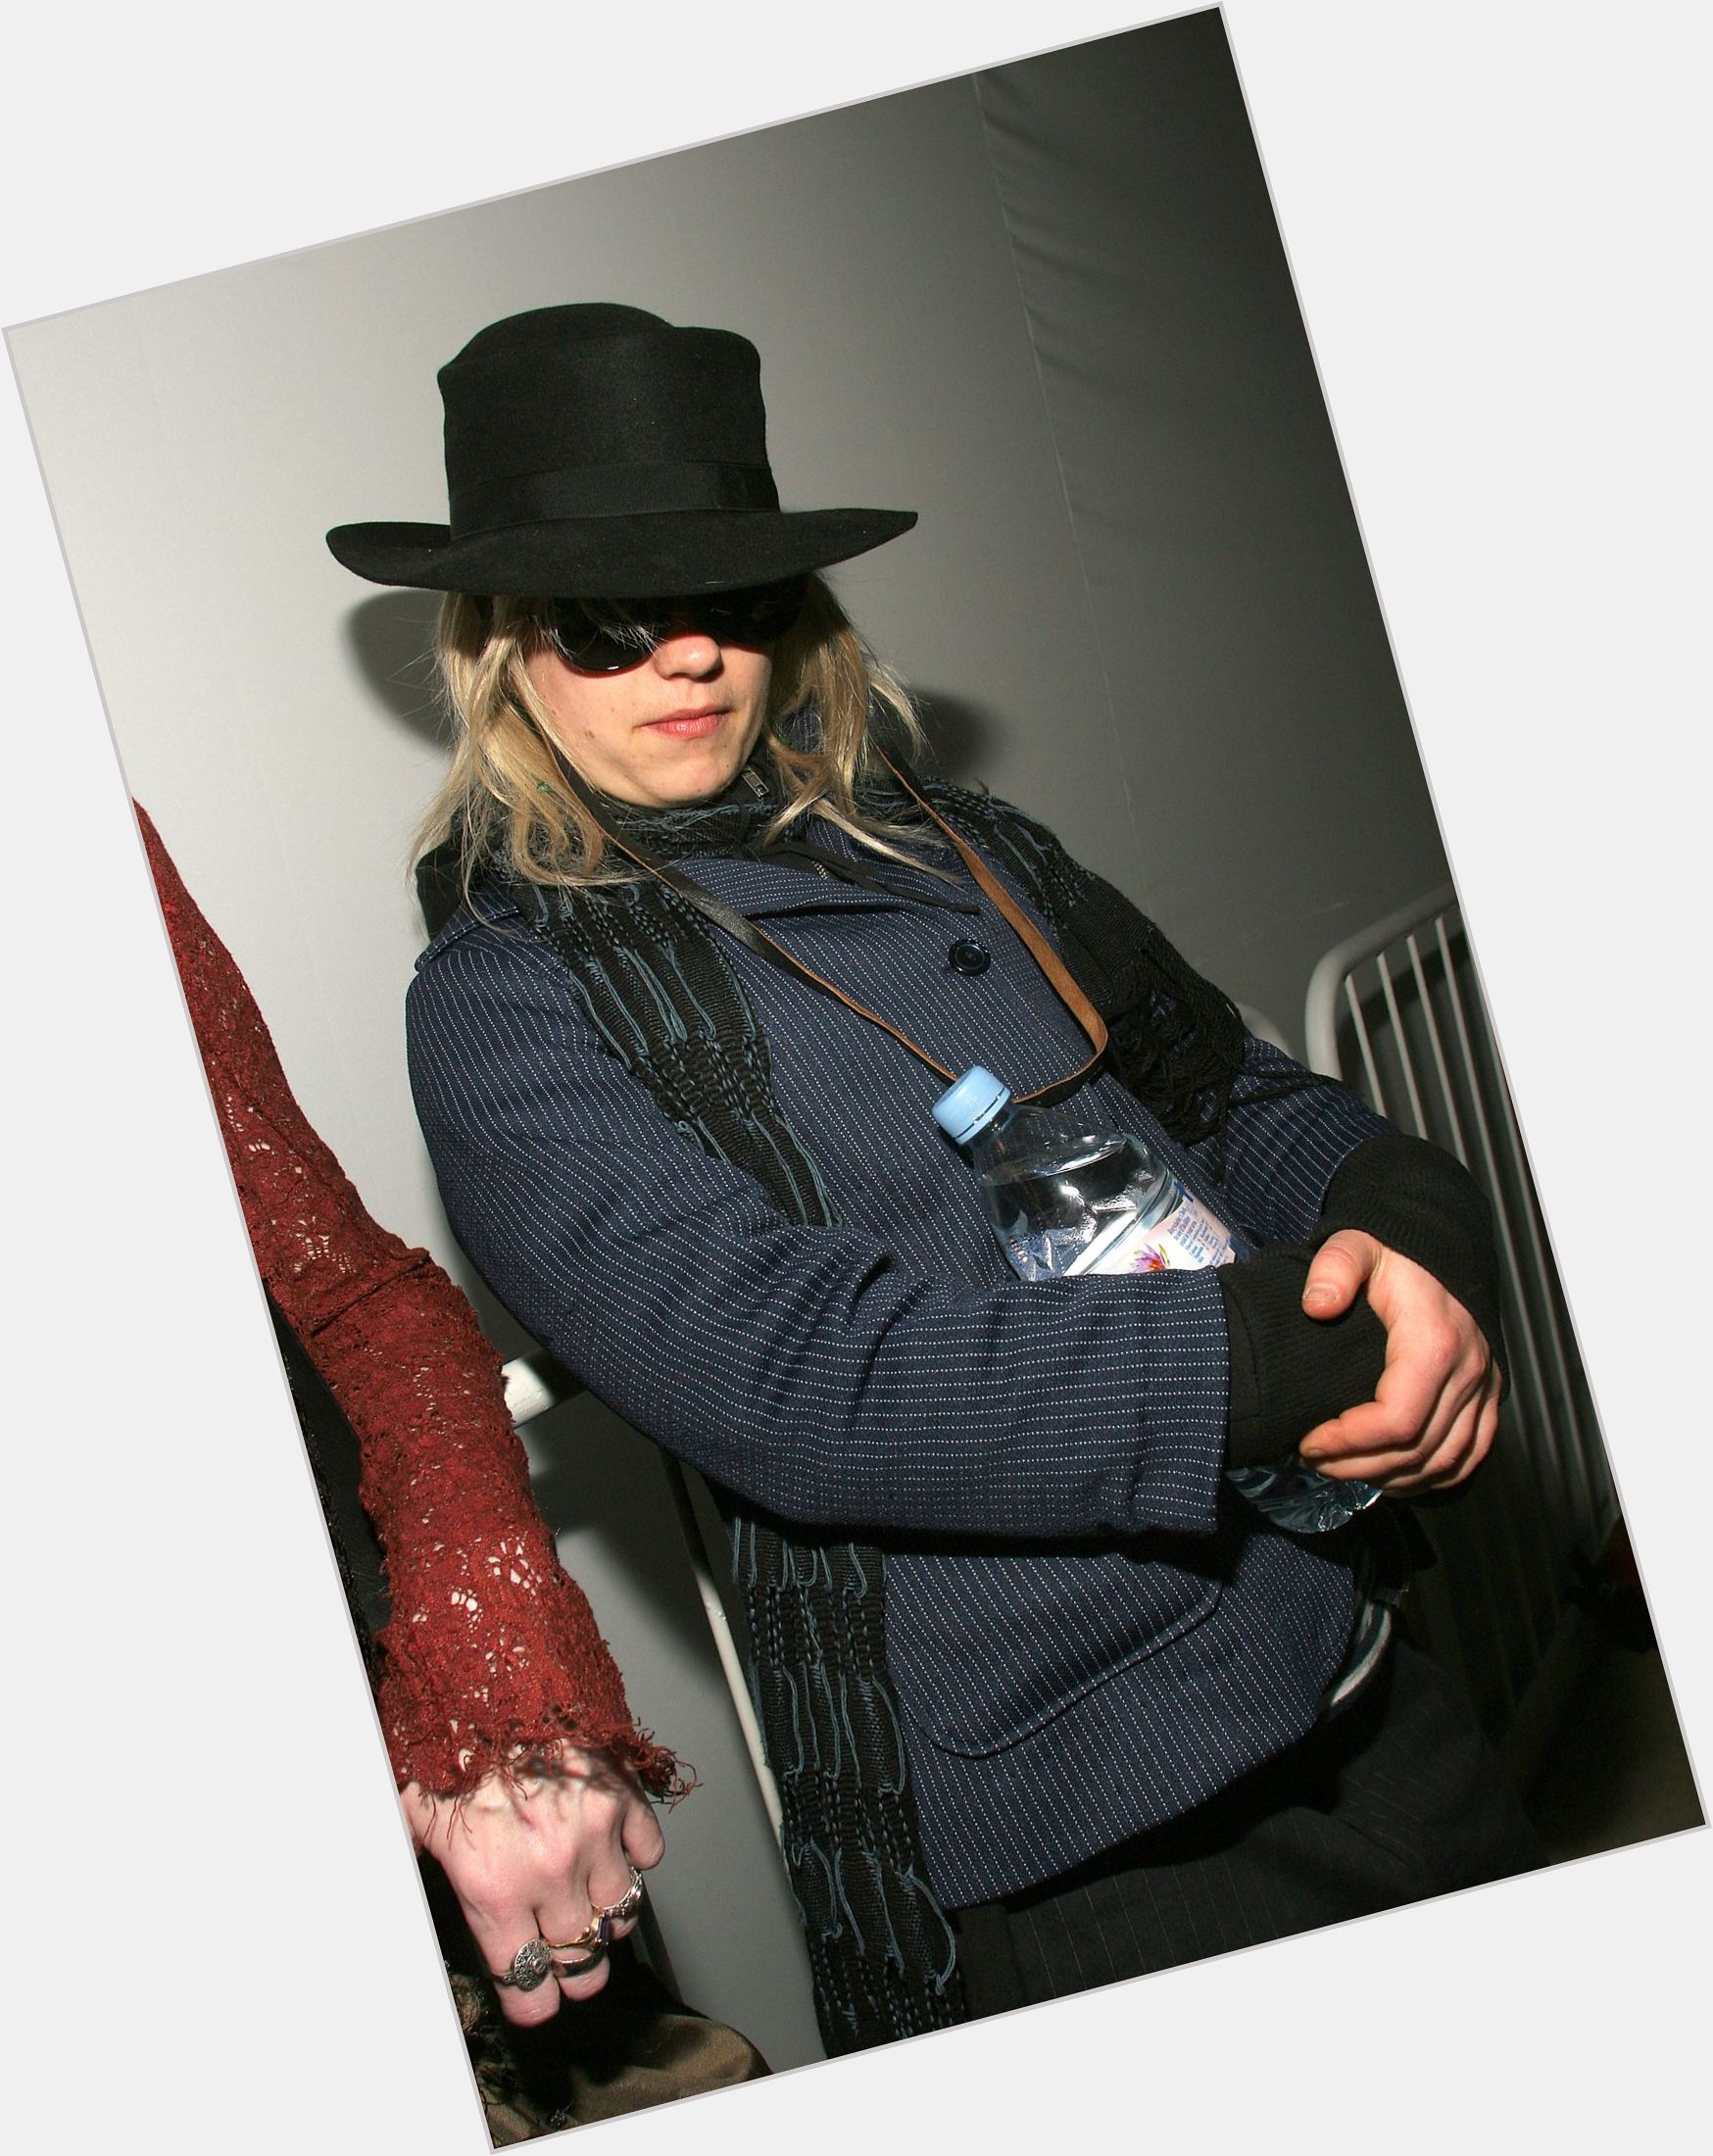 JT Leroy exclusive hot pic 6